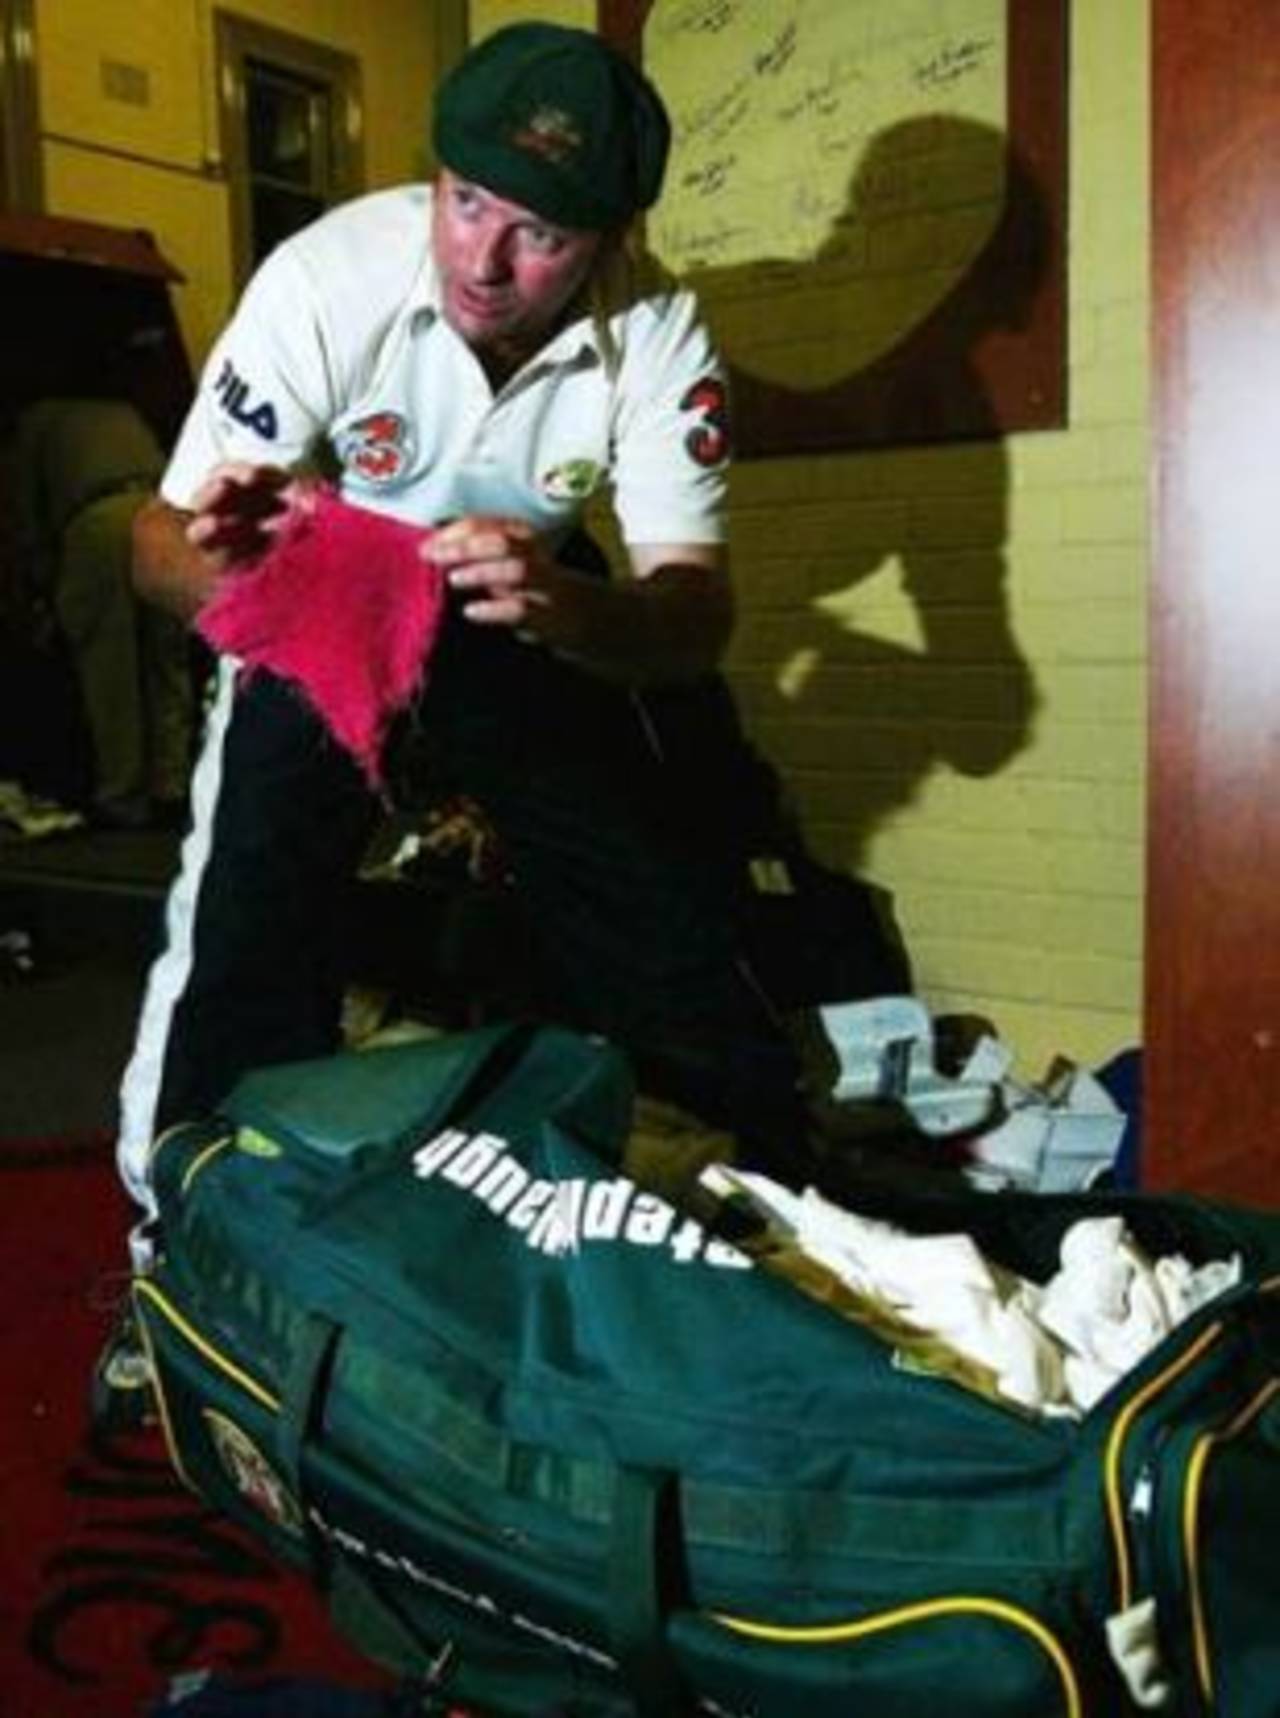 Steve Waugh packed his kit, and put away that red rag forever, Australia v India, 4th Test, Sydney, 5th day, January 6, 2004